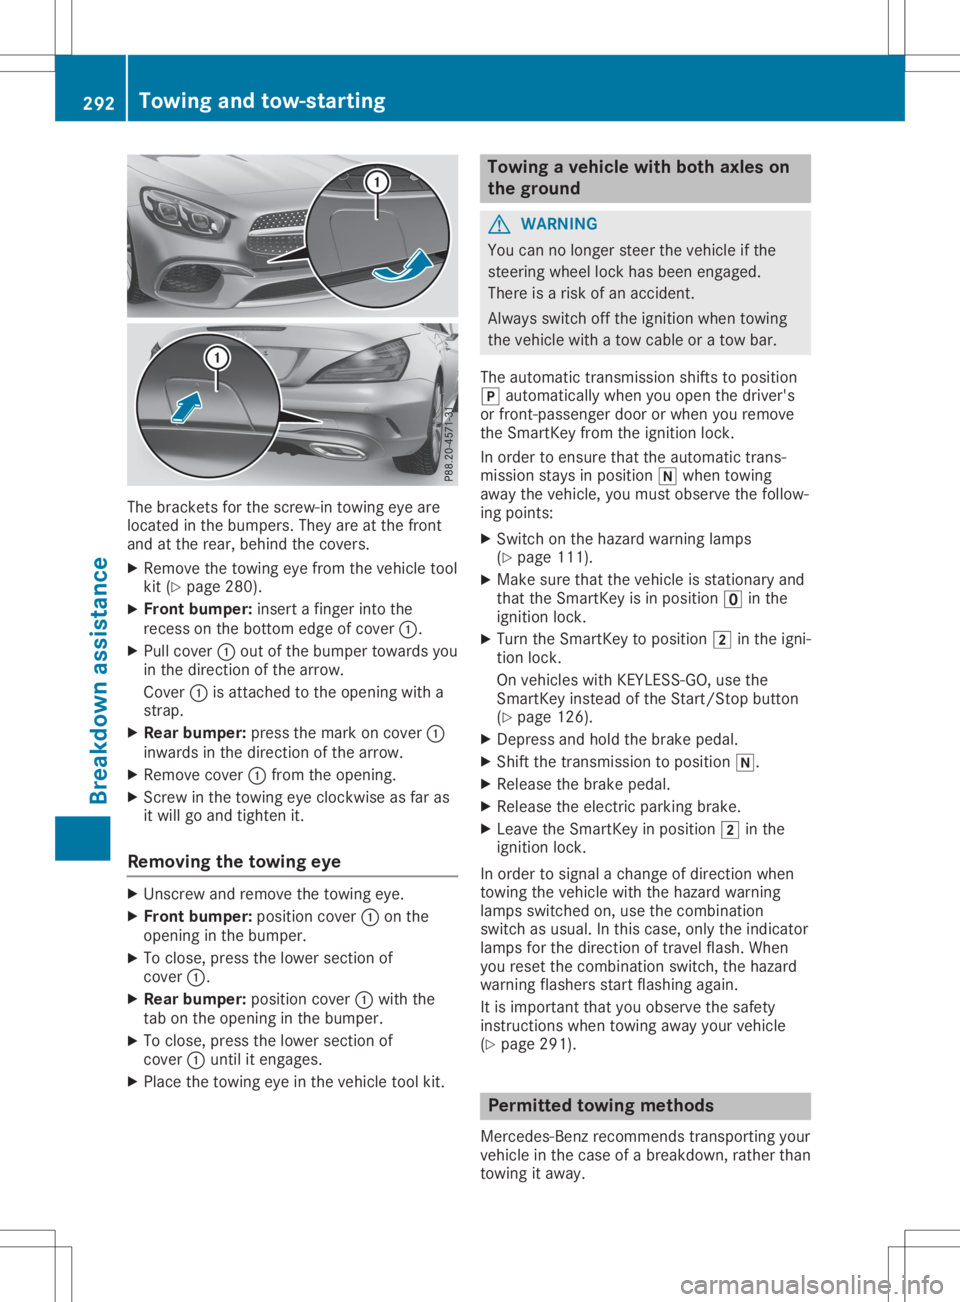 MERCEDES-BENZ SL CLASS 2020 User Guide The
bracket sfor the screw-in towingeyeare
located inthe bumpers. Theyareatthe front
and atthe rear, behind thecovers.
X Remove thetowing eyefrom thevehicle tool
kit (Ypage 280).
X Front bumper:insert